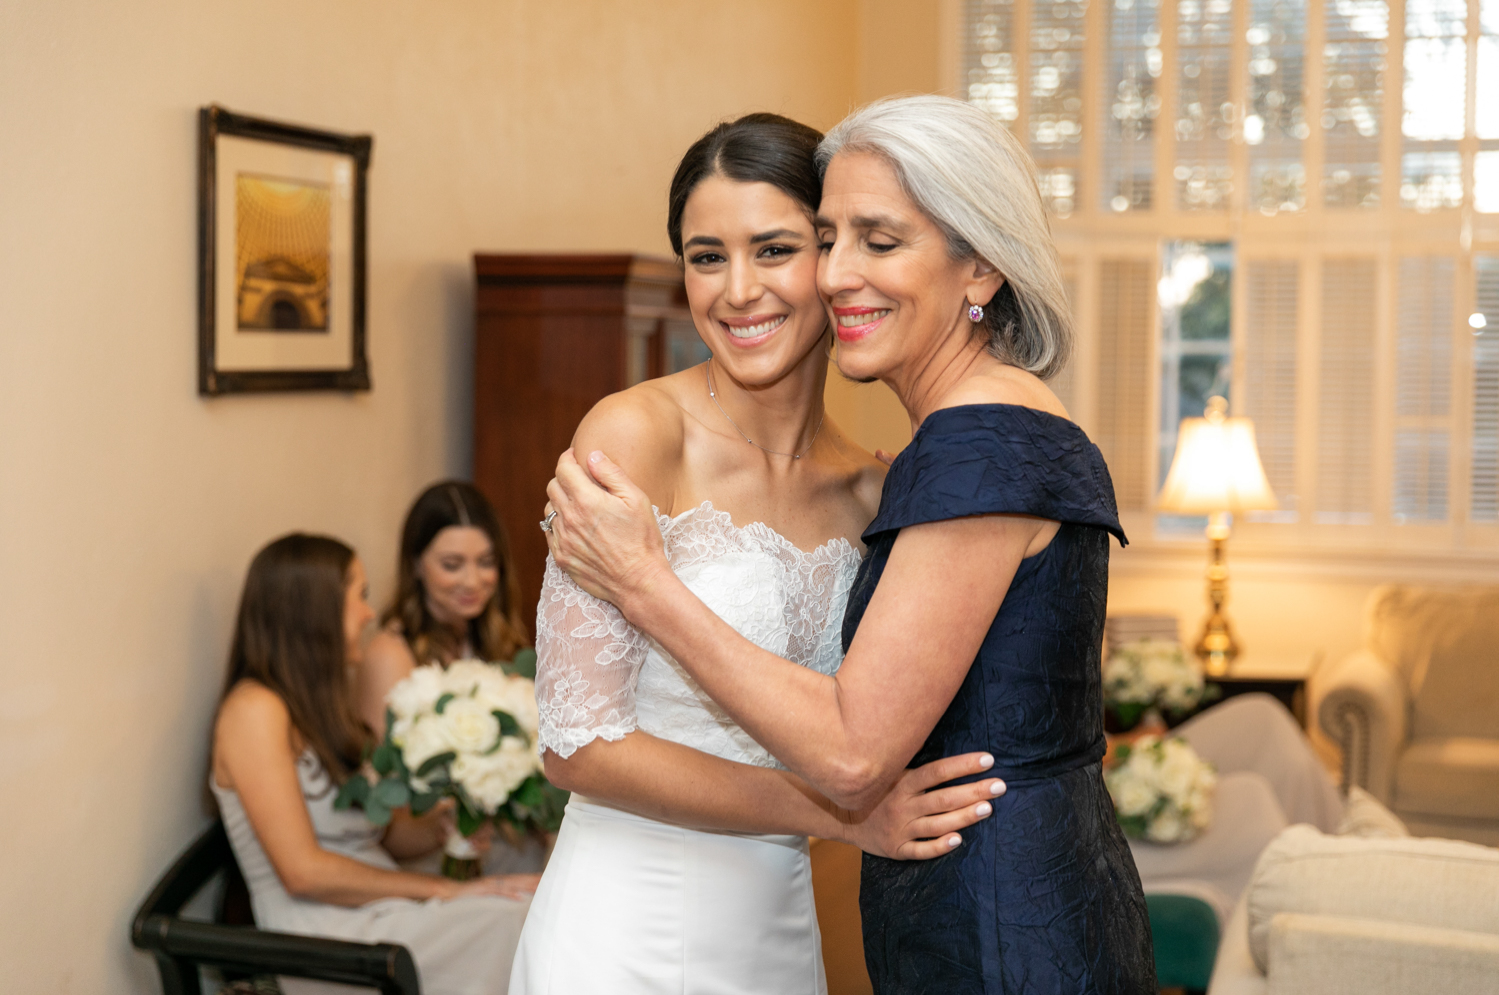 The bride hugs her mother before the ceremony